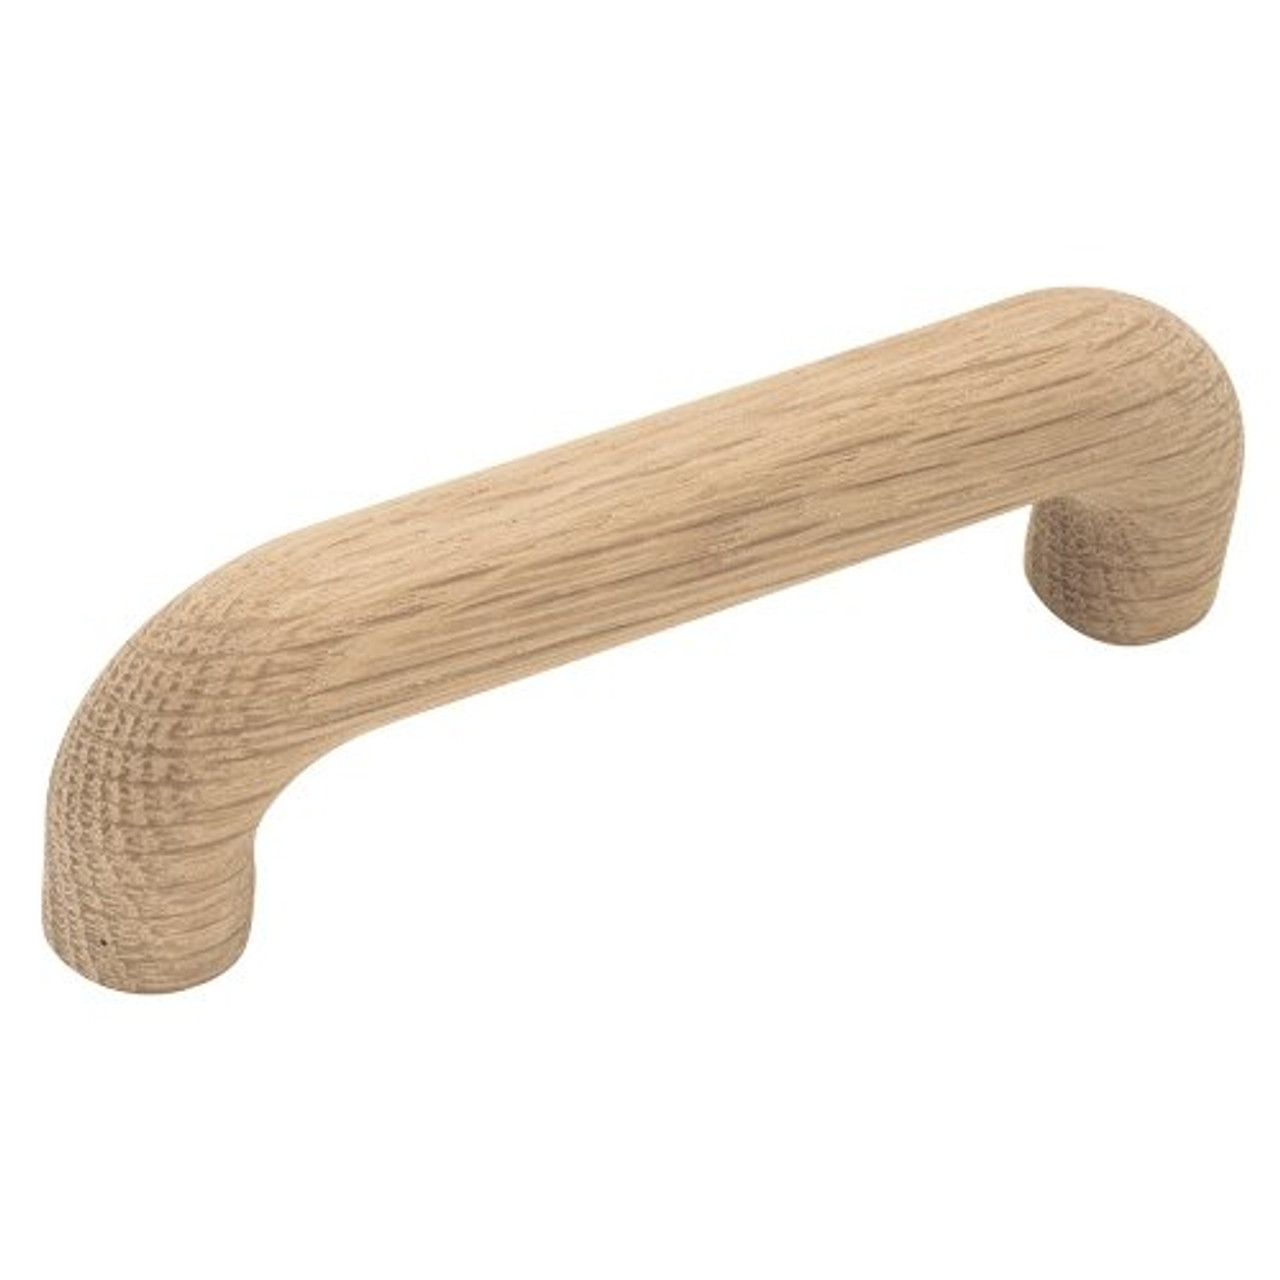 Hickory Hardware 3-1/2" INCH NATURAL WOODCRAFT UNFINISHED WOOD CABINET PULL P67